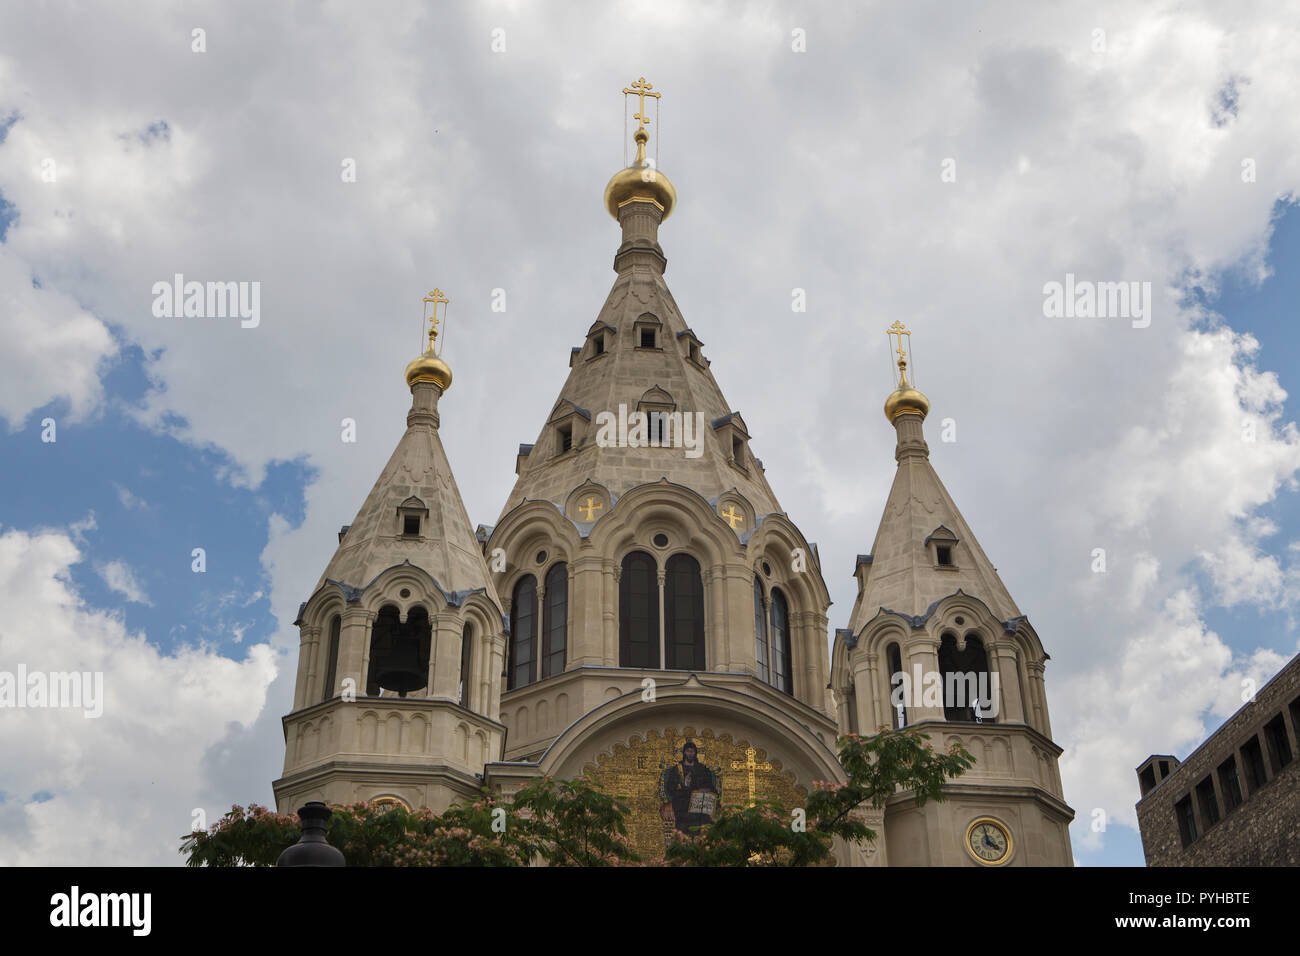 Alexander Nevsky Cathedral (Cathédrale Saint-Alexandre-Nevsky) in Paris, France. The Russian Orthodox cathedral designed by Russian architects Roman Kuzmin and Ivan Strom was completed in 1861. Stock Photo